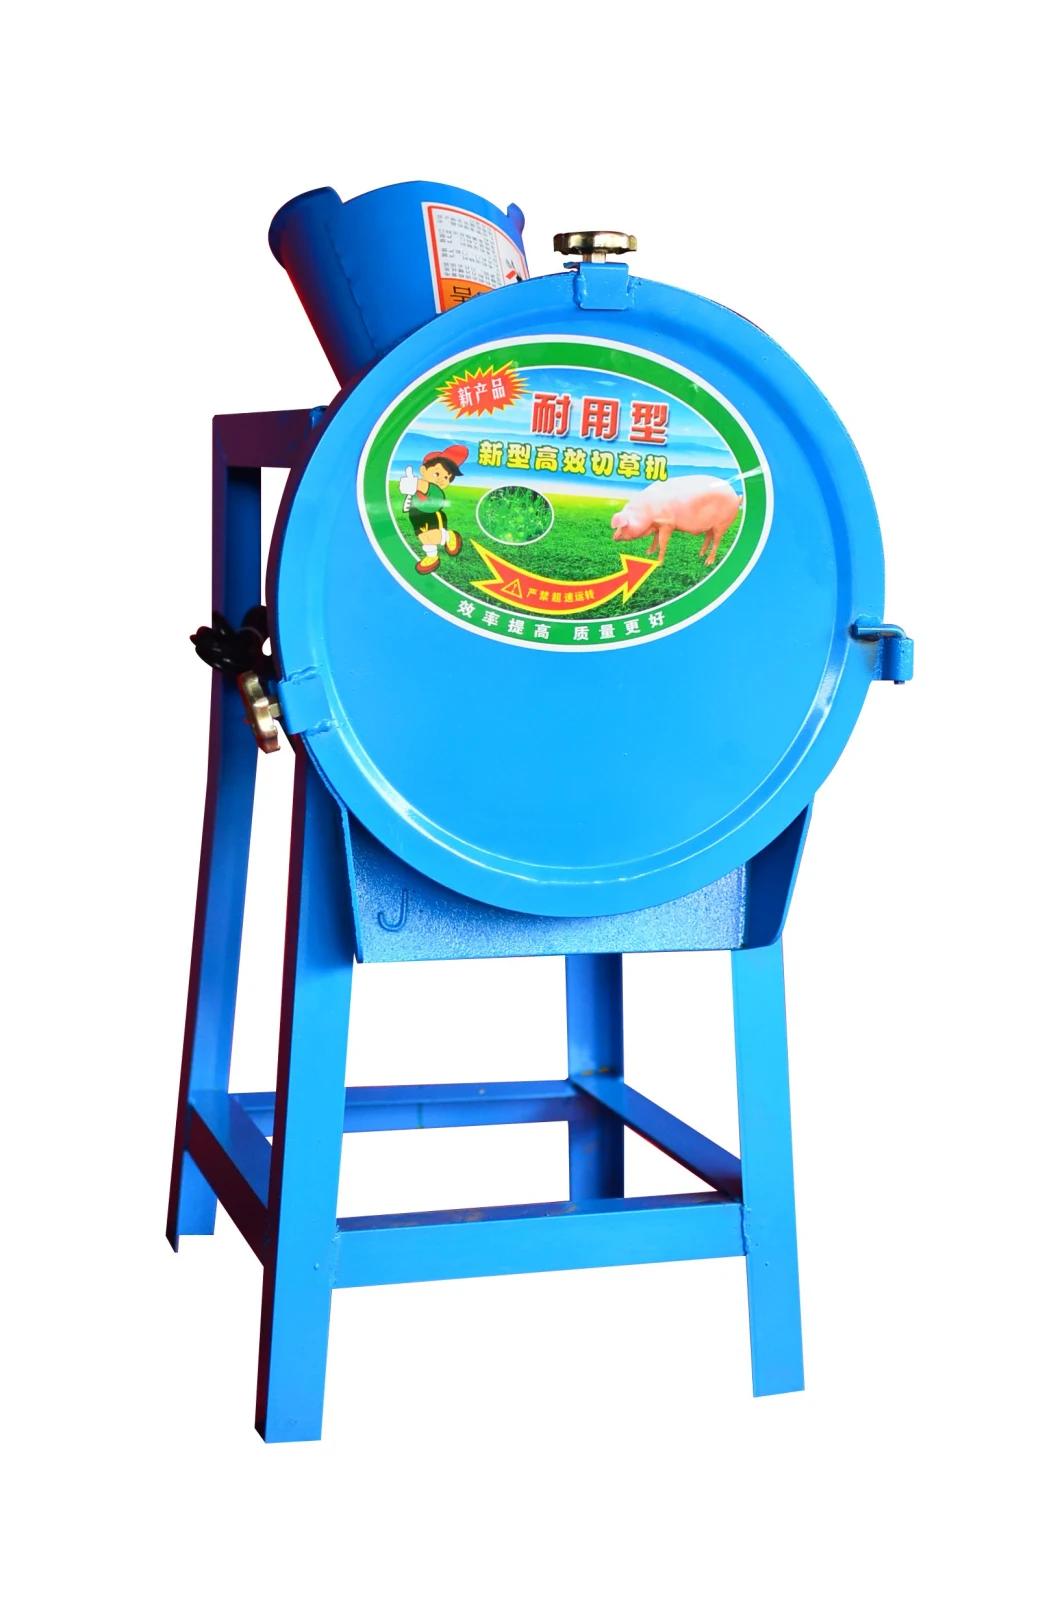 93QS-0.4 Grain Processing Machinery Used for Rice Milling Made in China